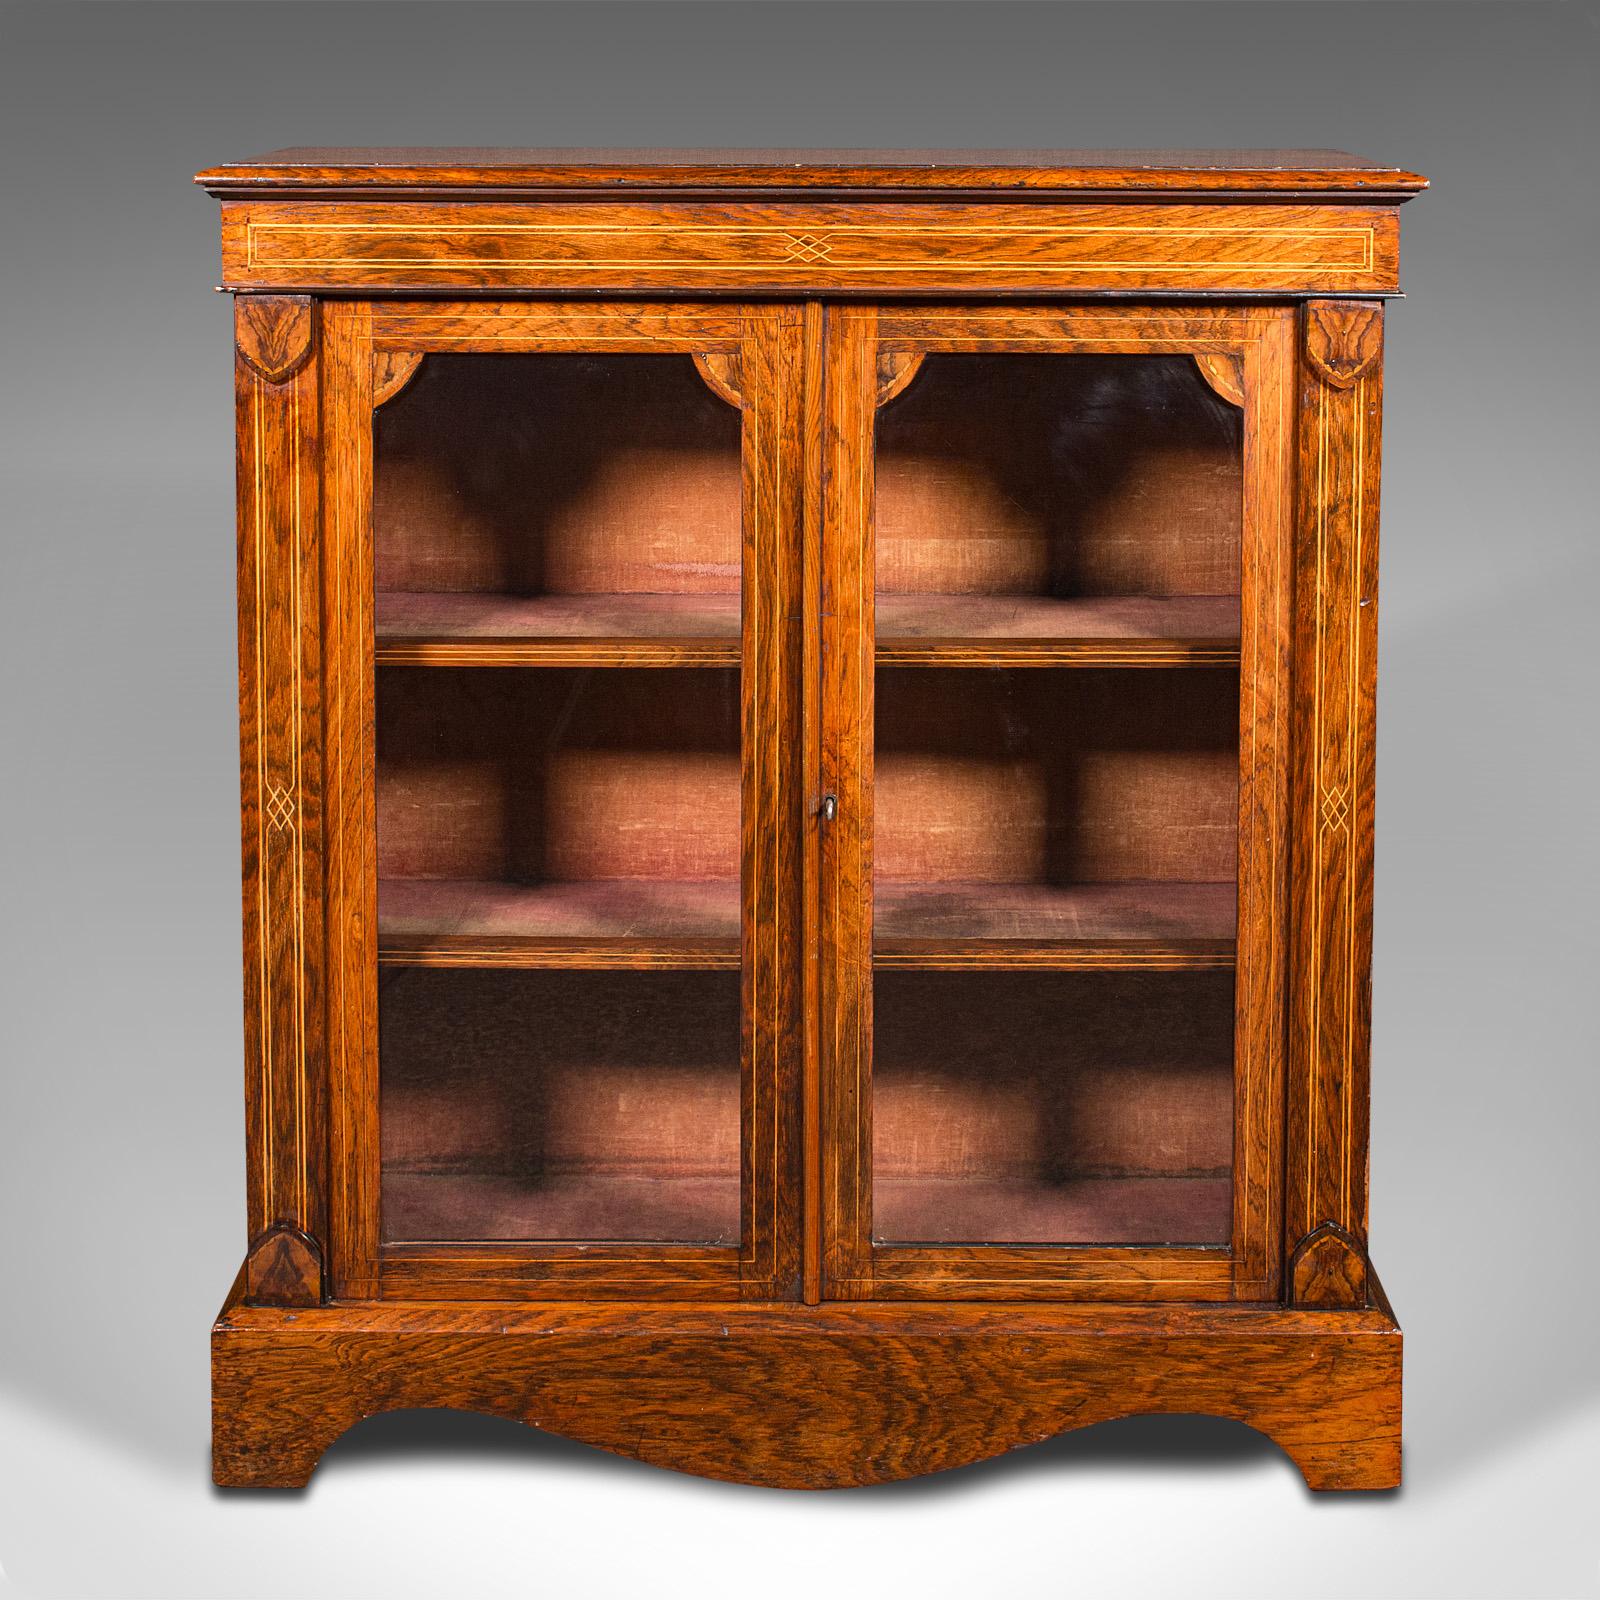 This is an antique double pier cabinet. An English, tiger mahogany glazed display cupboard, dating to the Regency period, circa 1820.

Graced with delightful inlaid detail and rich colour
Displays a desirable aged patina and in very good